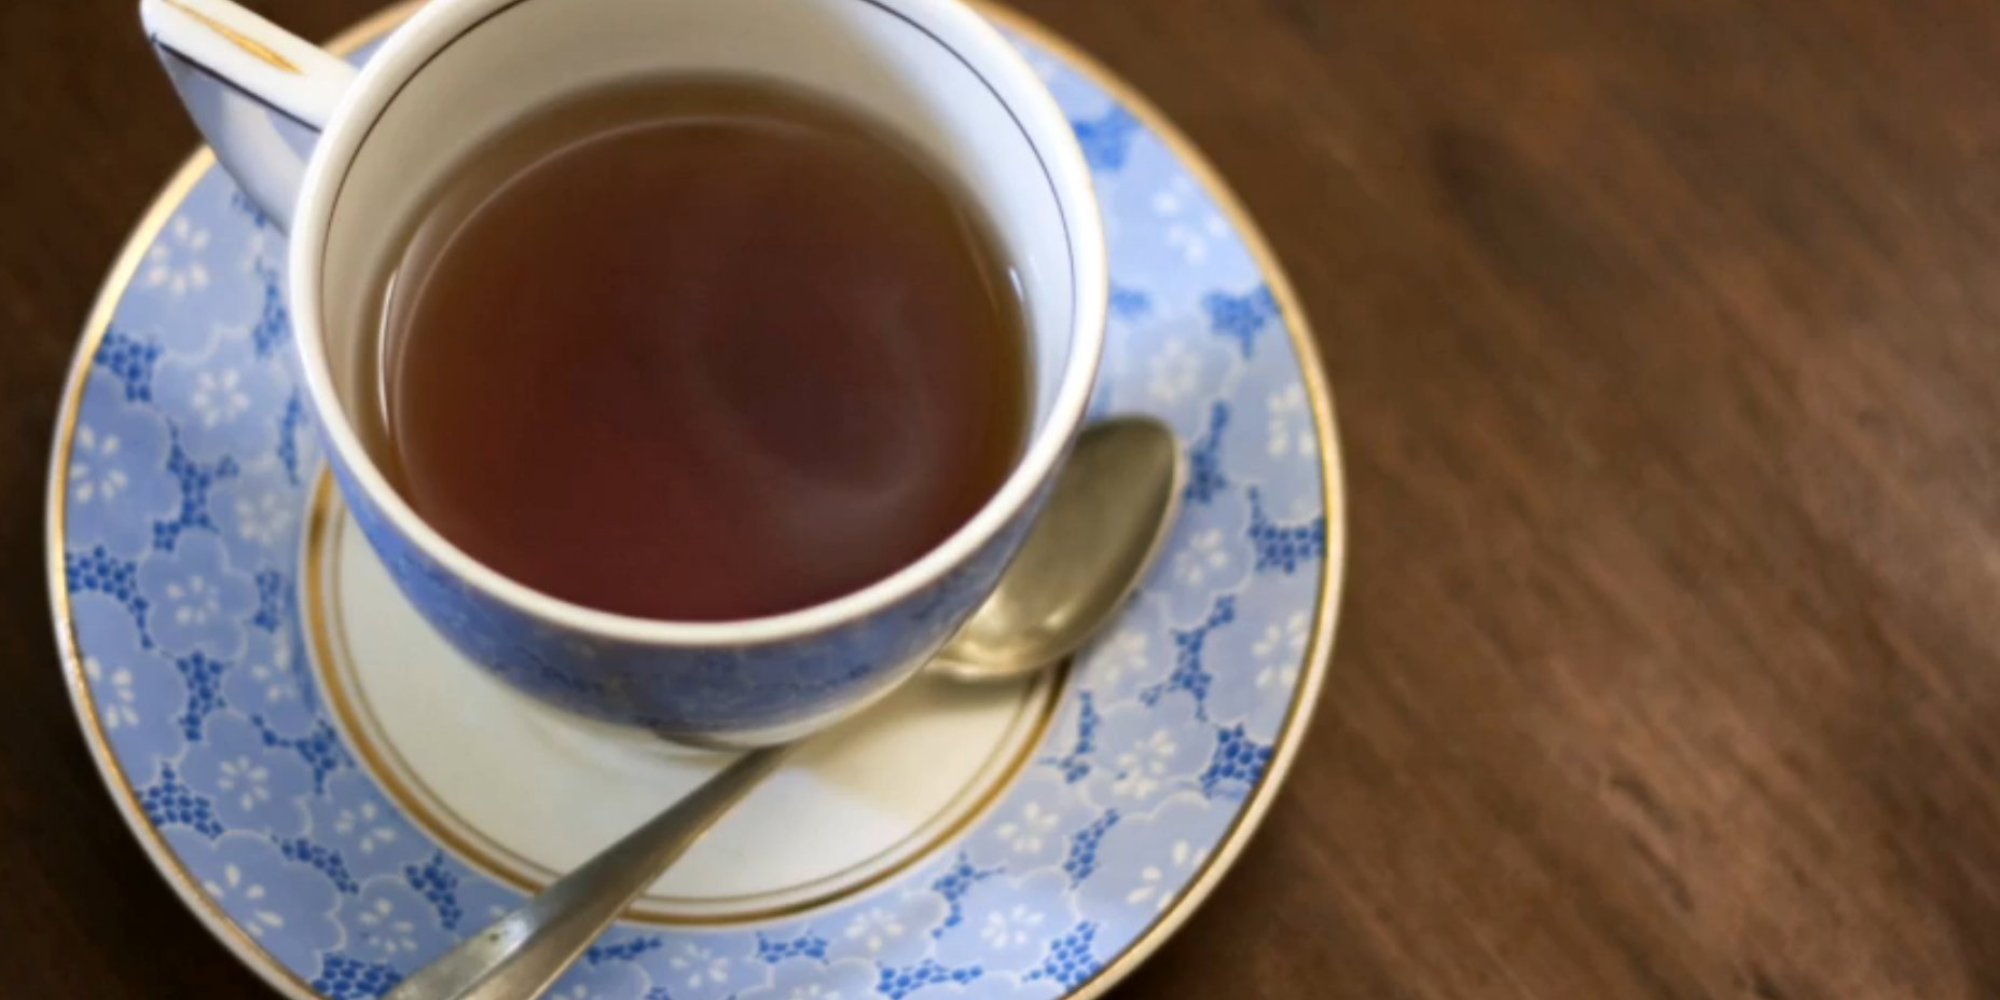 Attention Tea Lovers: Here's Everything You Need To Know About Your